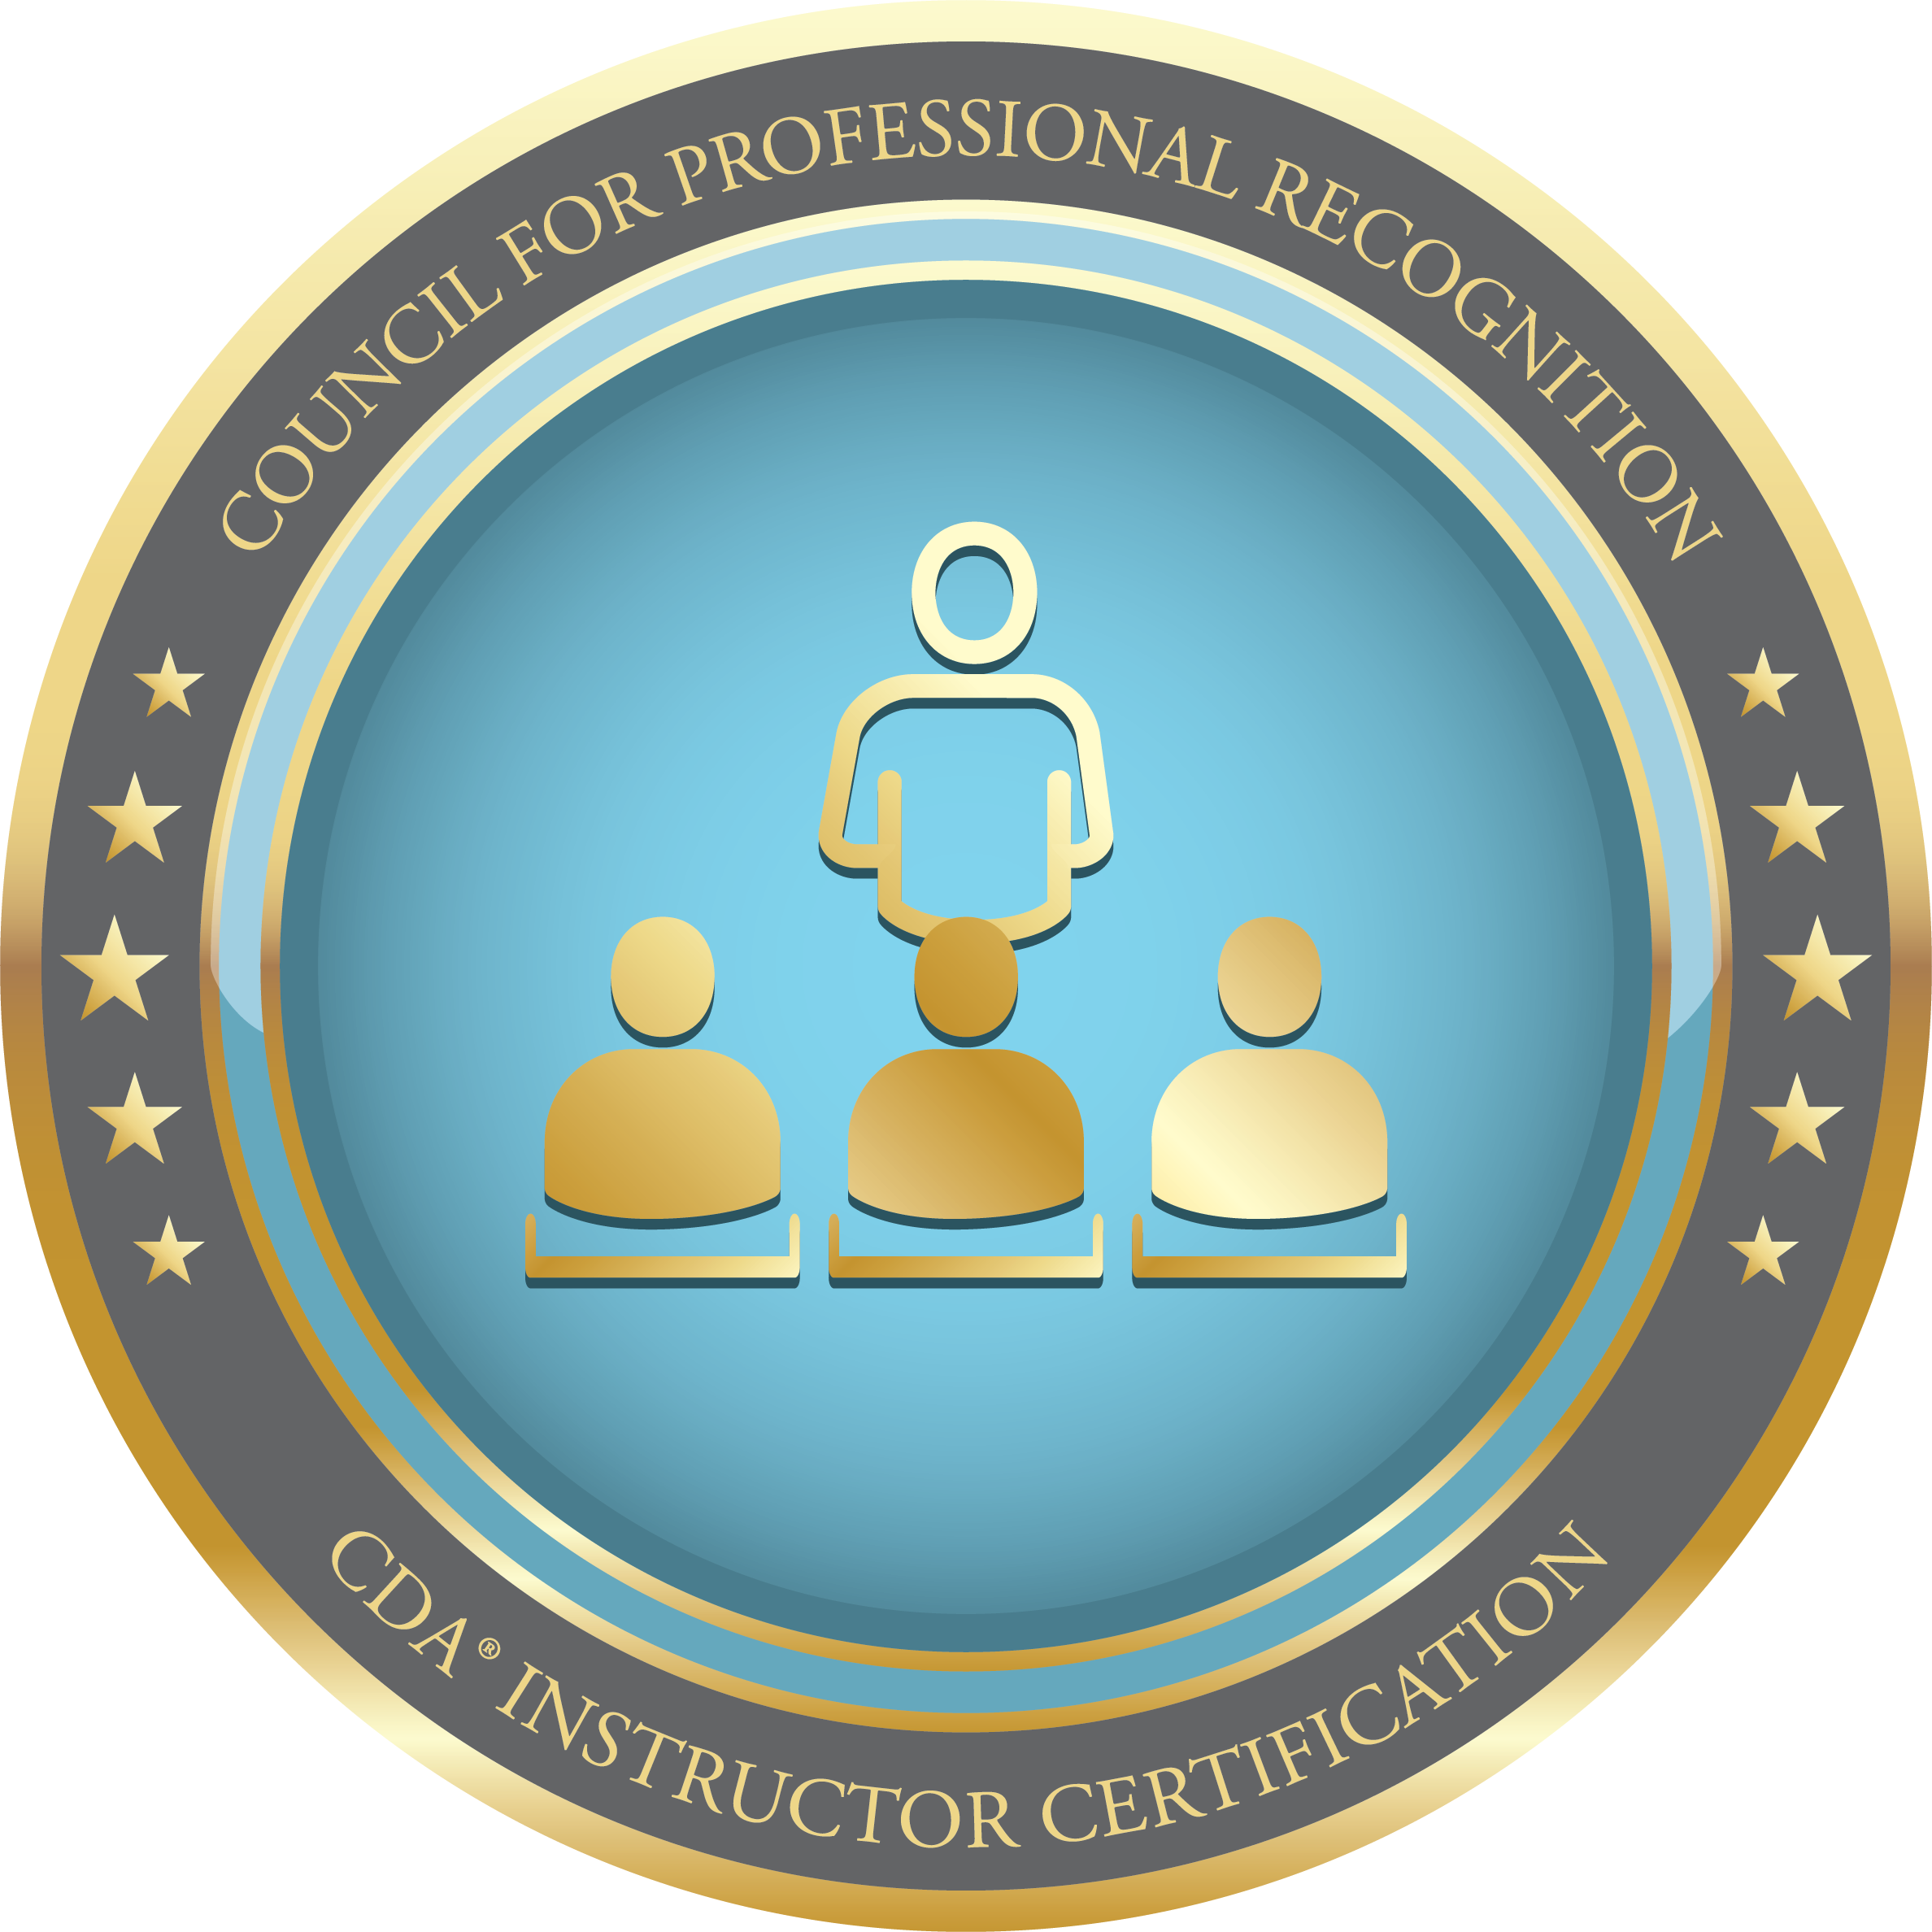 Council for Professional Recognition CDA Instructor Certification